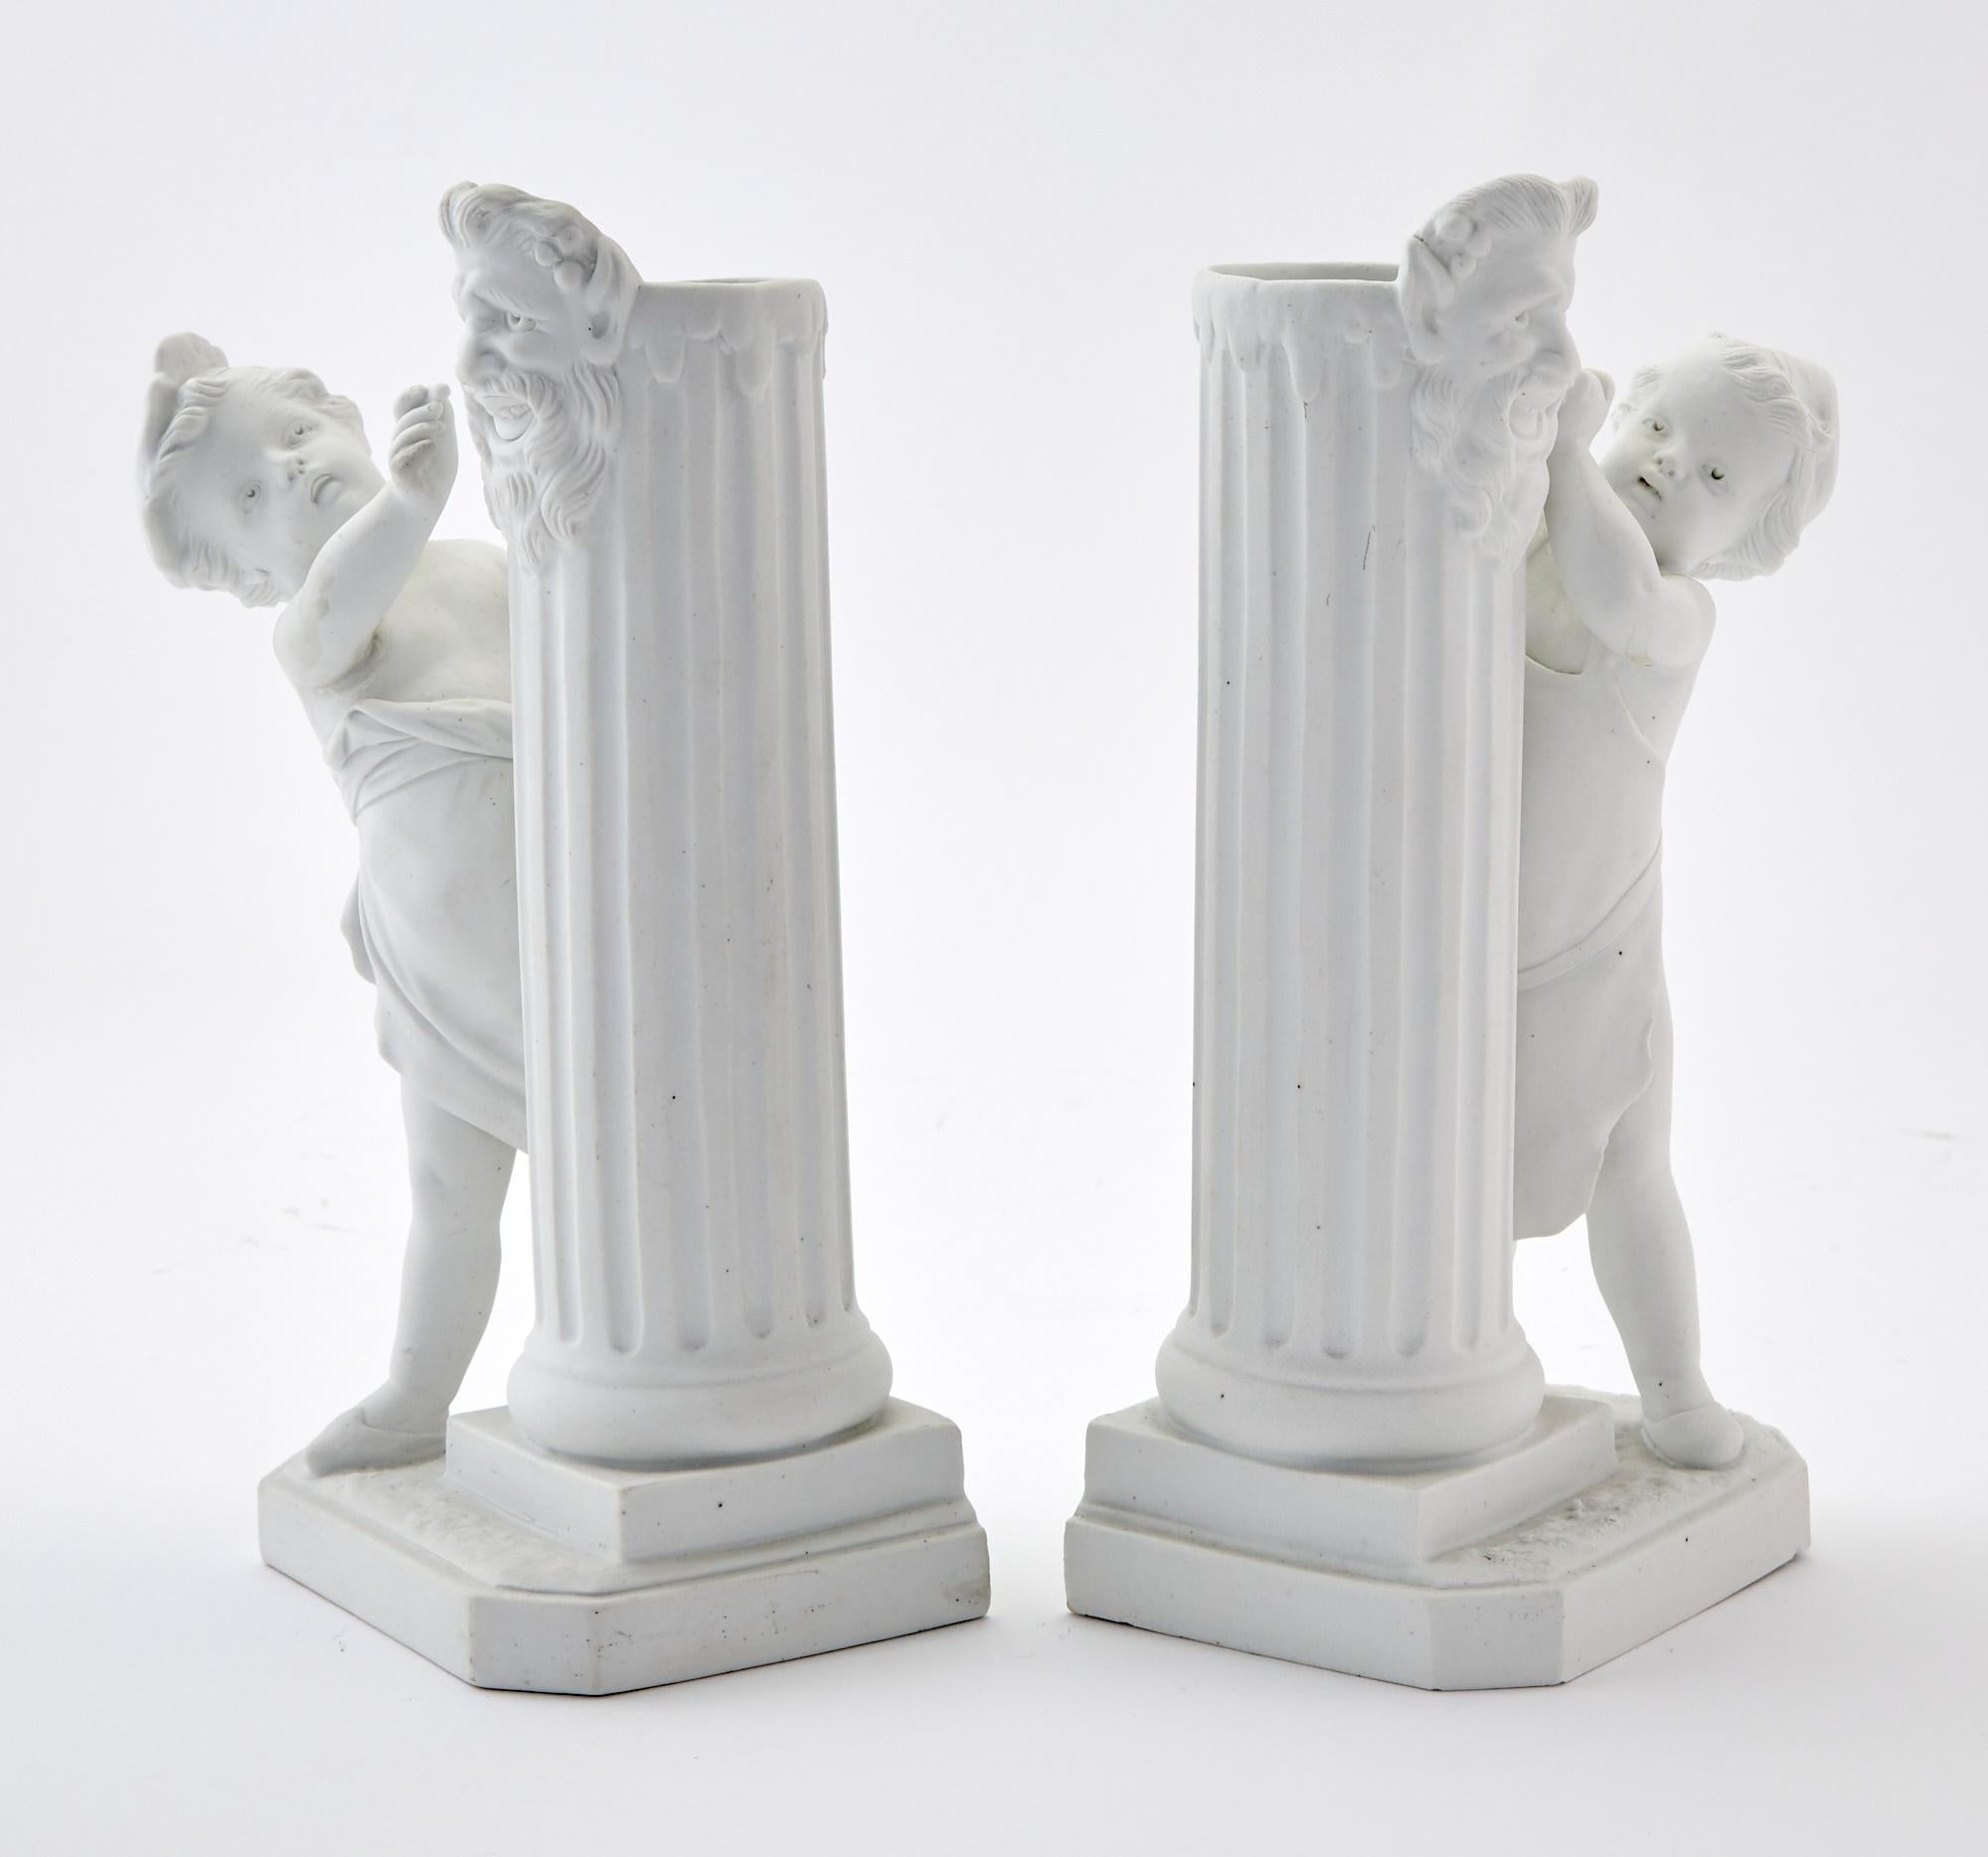 Hand-Crafted Sevres Style Bisque Porcelain Decorative Figural Pair Vases For Sale